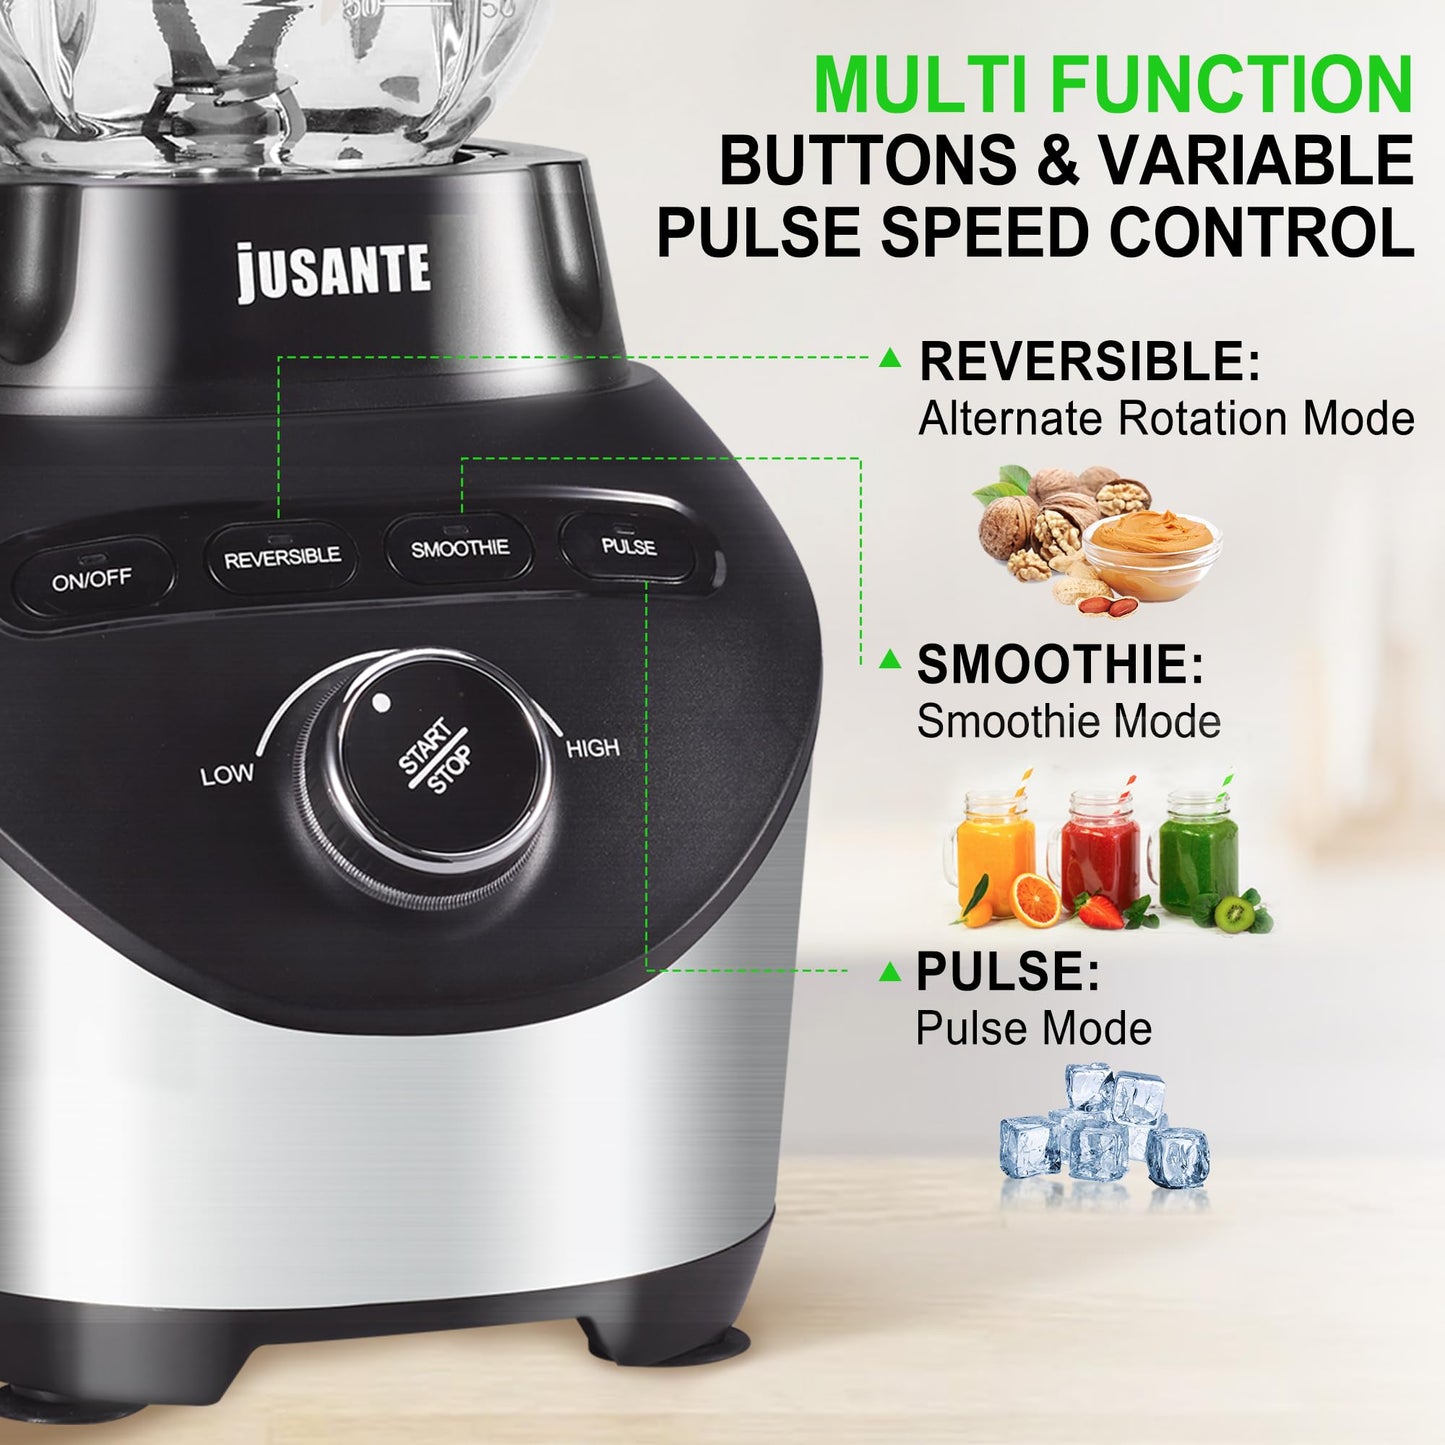 JUSANTE Professional Blender with 1200 Watts and 64 oz Glass Jar Kitchen Countertop Blender for Shakes and Smoothies with High Speed Total Crushing Smoothie Blender Black for Smoothies Frozen Drinks